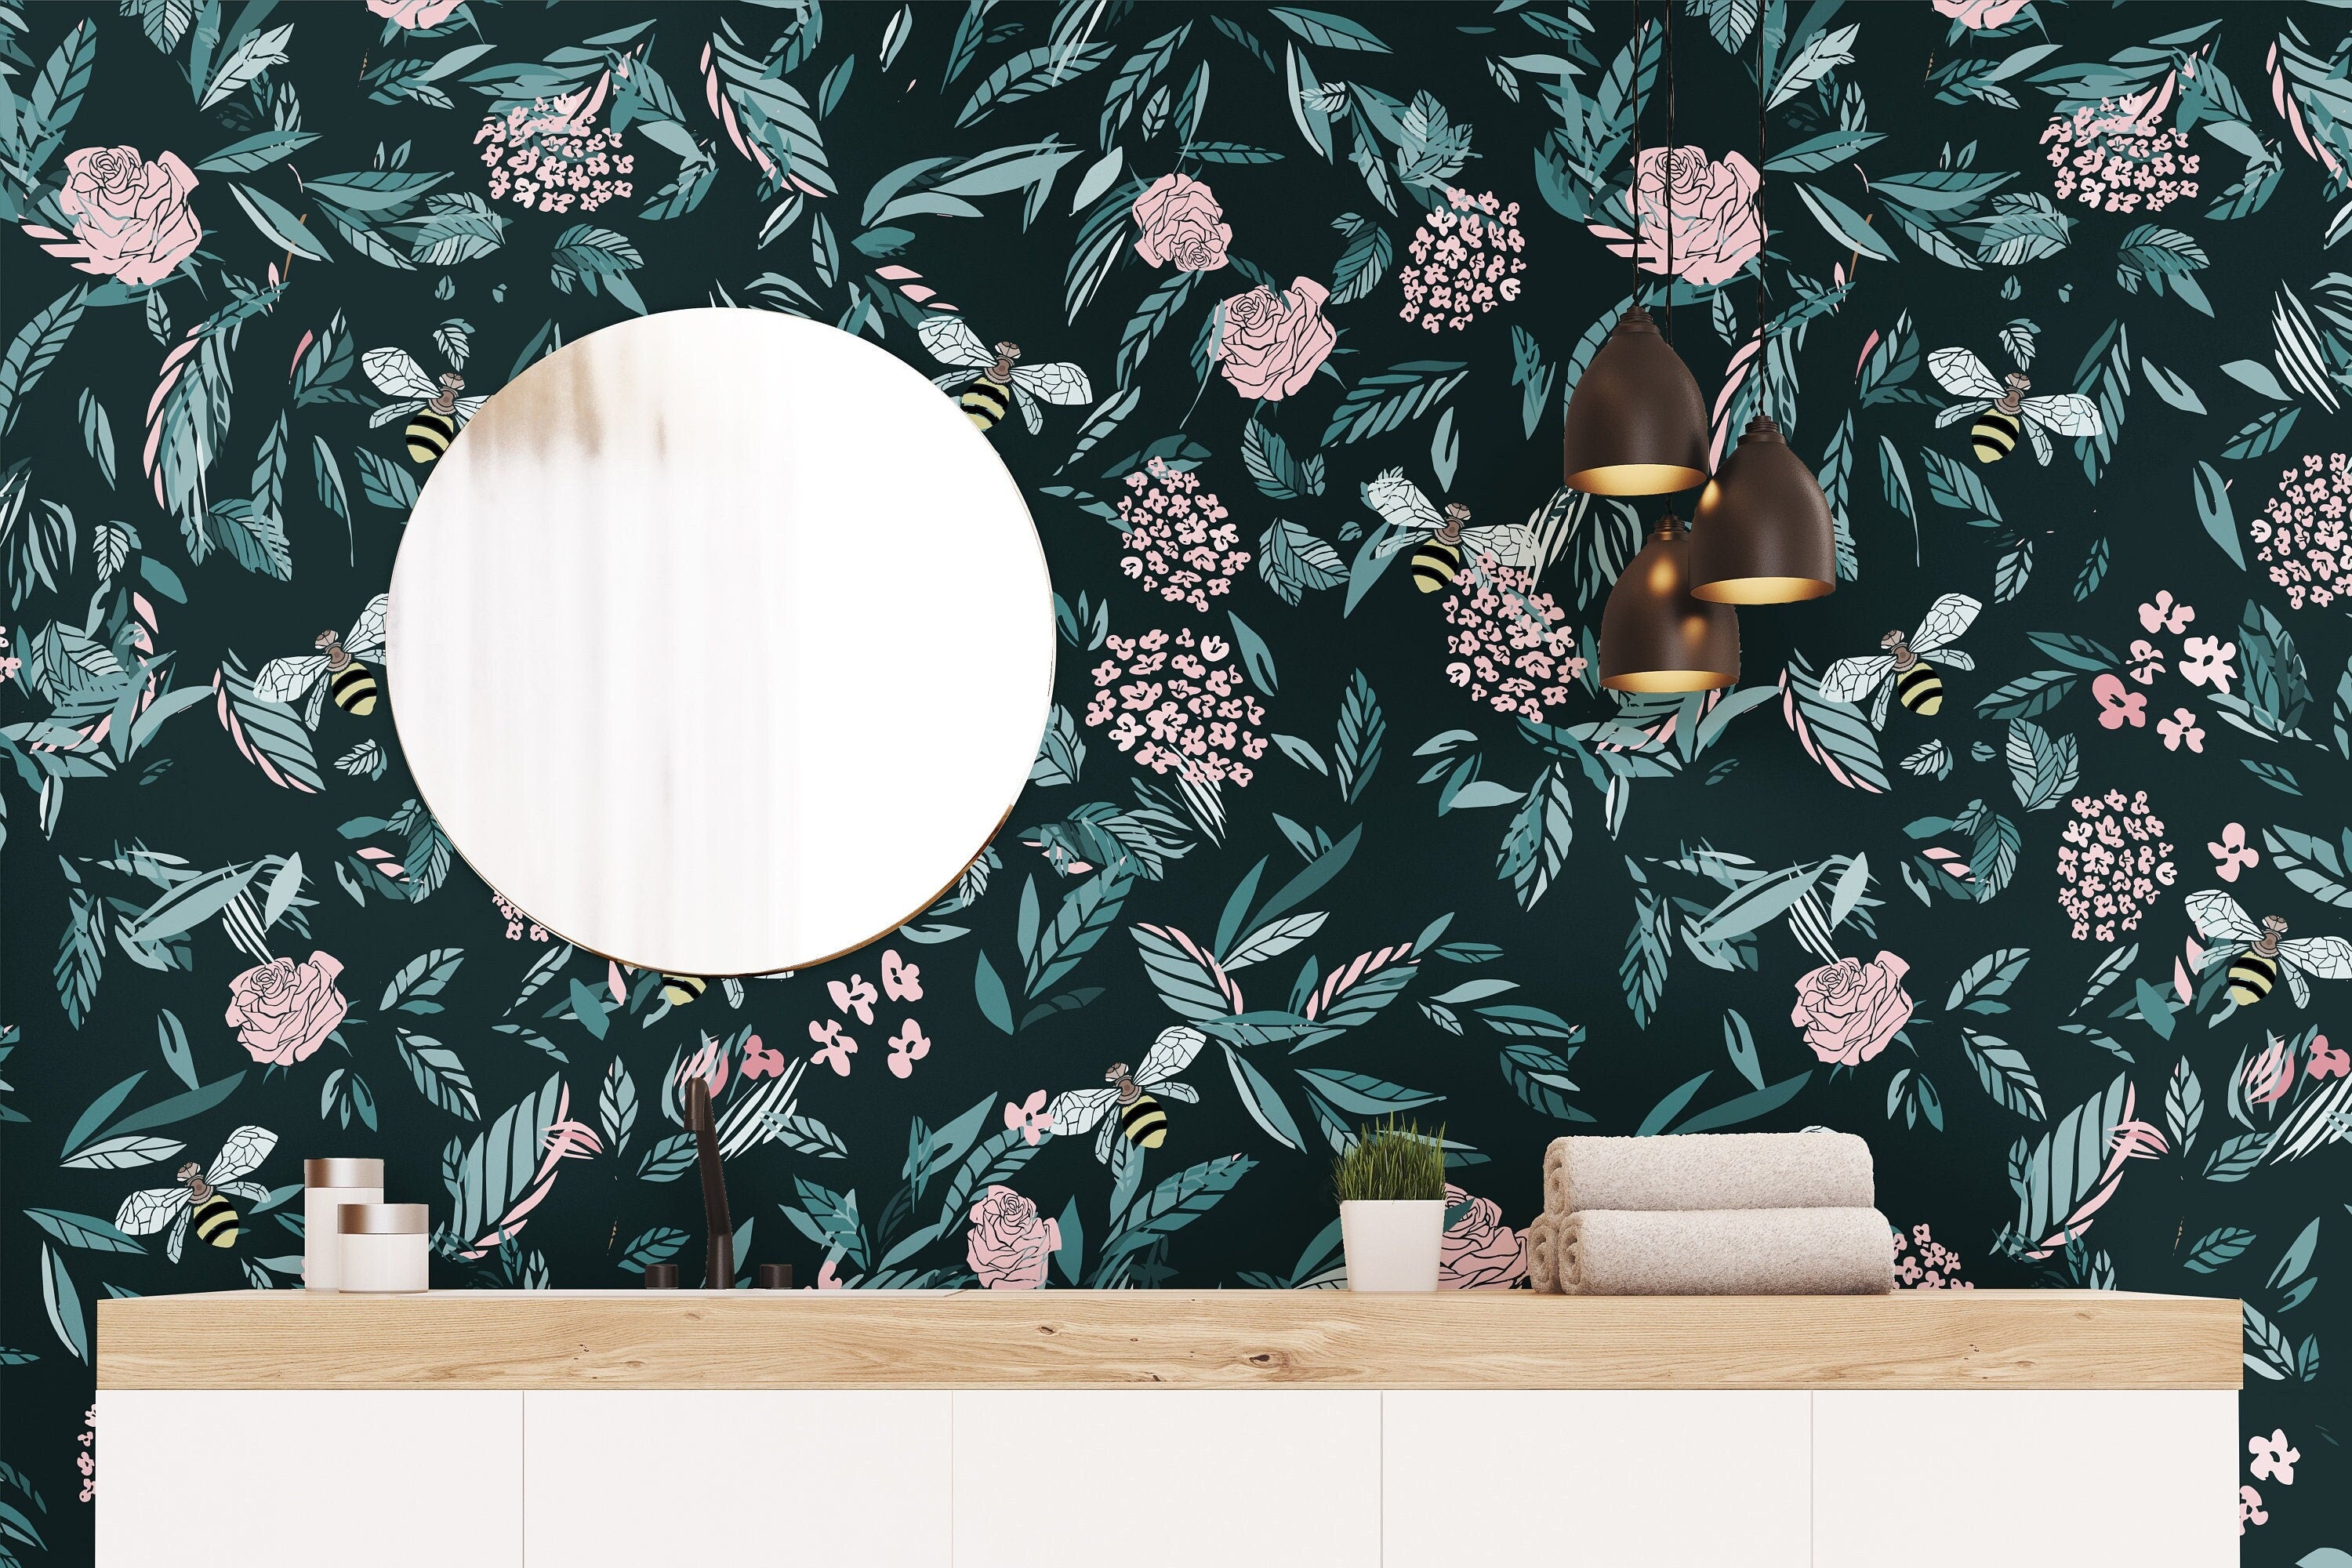 Floral And Bee Dark Wallpaper | Removable Wallpaper | Peel And Stick Wallpaper | Adhesive Wallpaper | Wall Paper Peel Stick Wall Mural 3459 - JamesAndColors